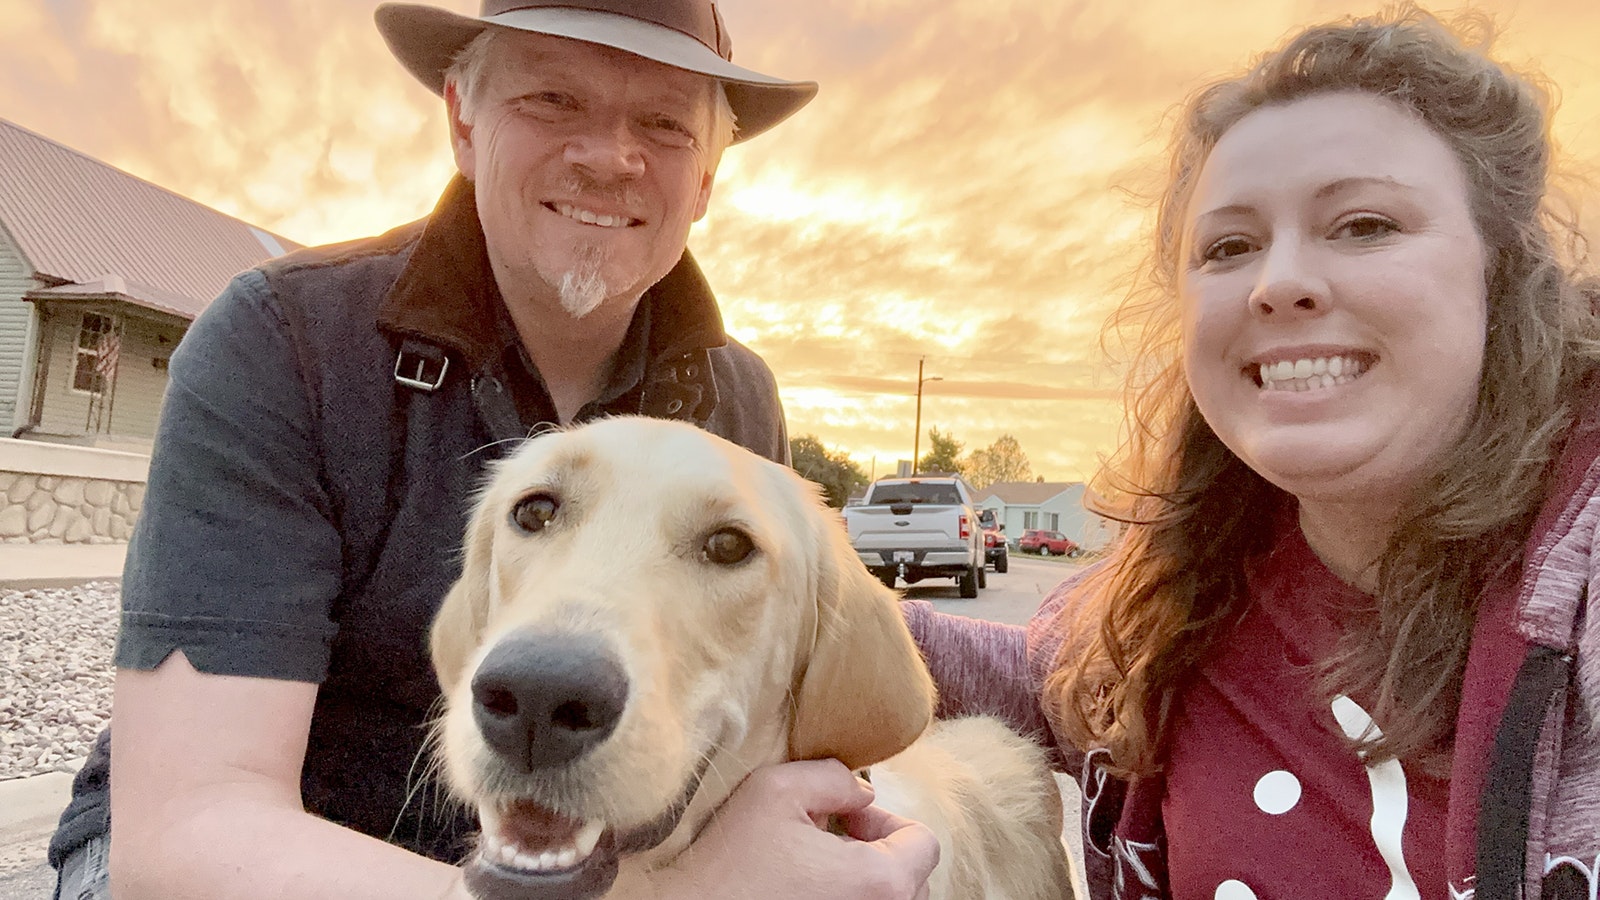 Jacob and Bethany Balser said that they and their dog, Mavrick, were cornered late Monday by three vicious canines that may have been wolves.